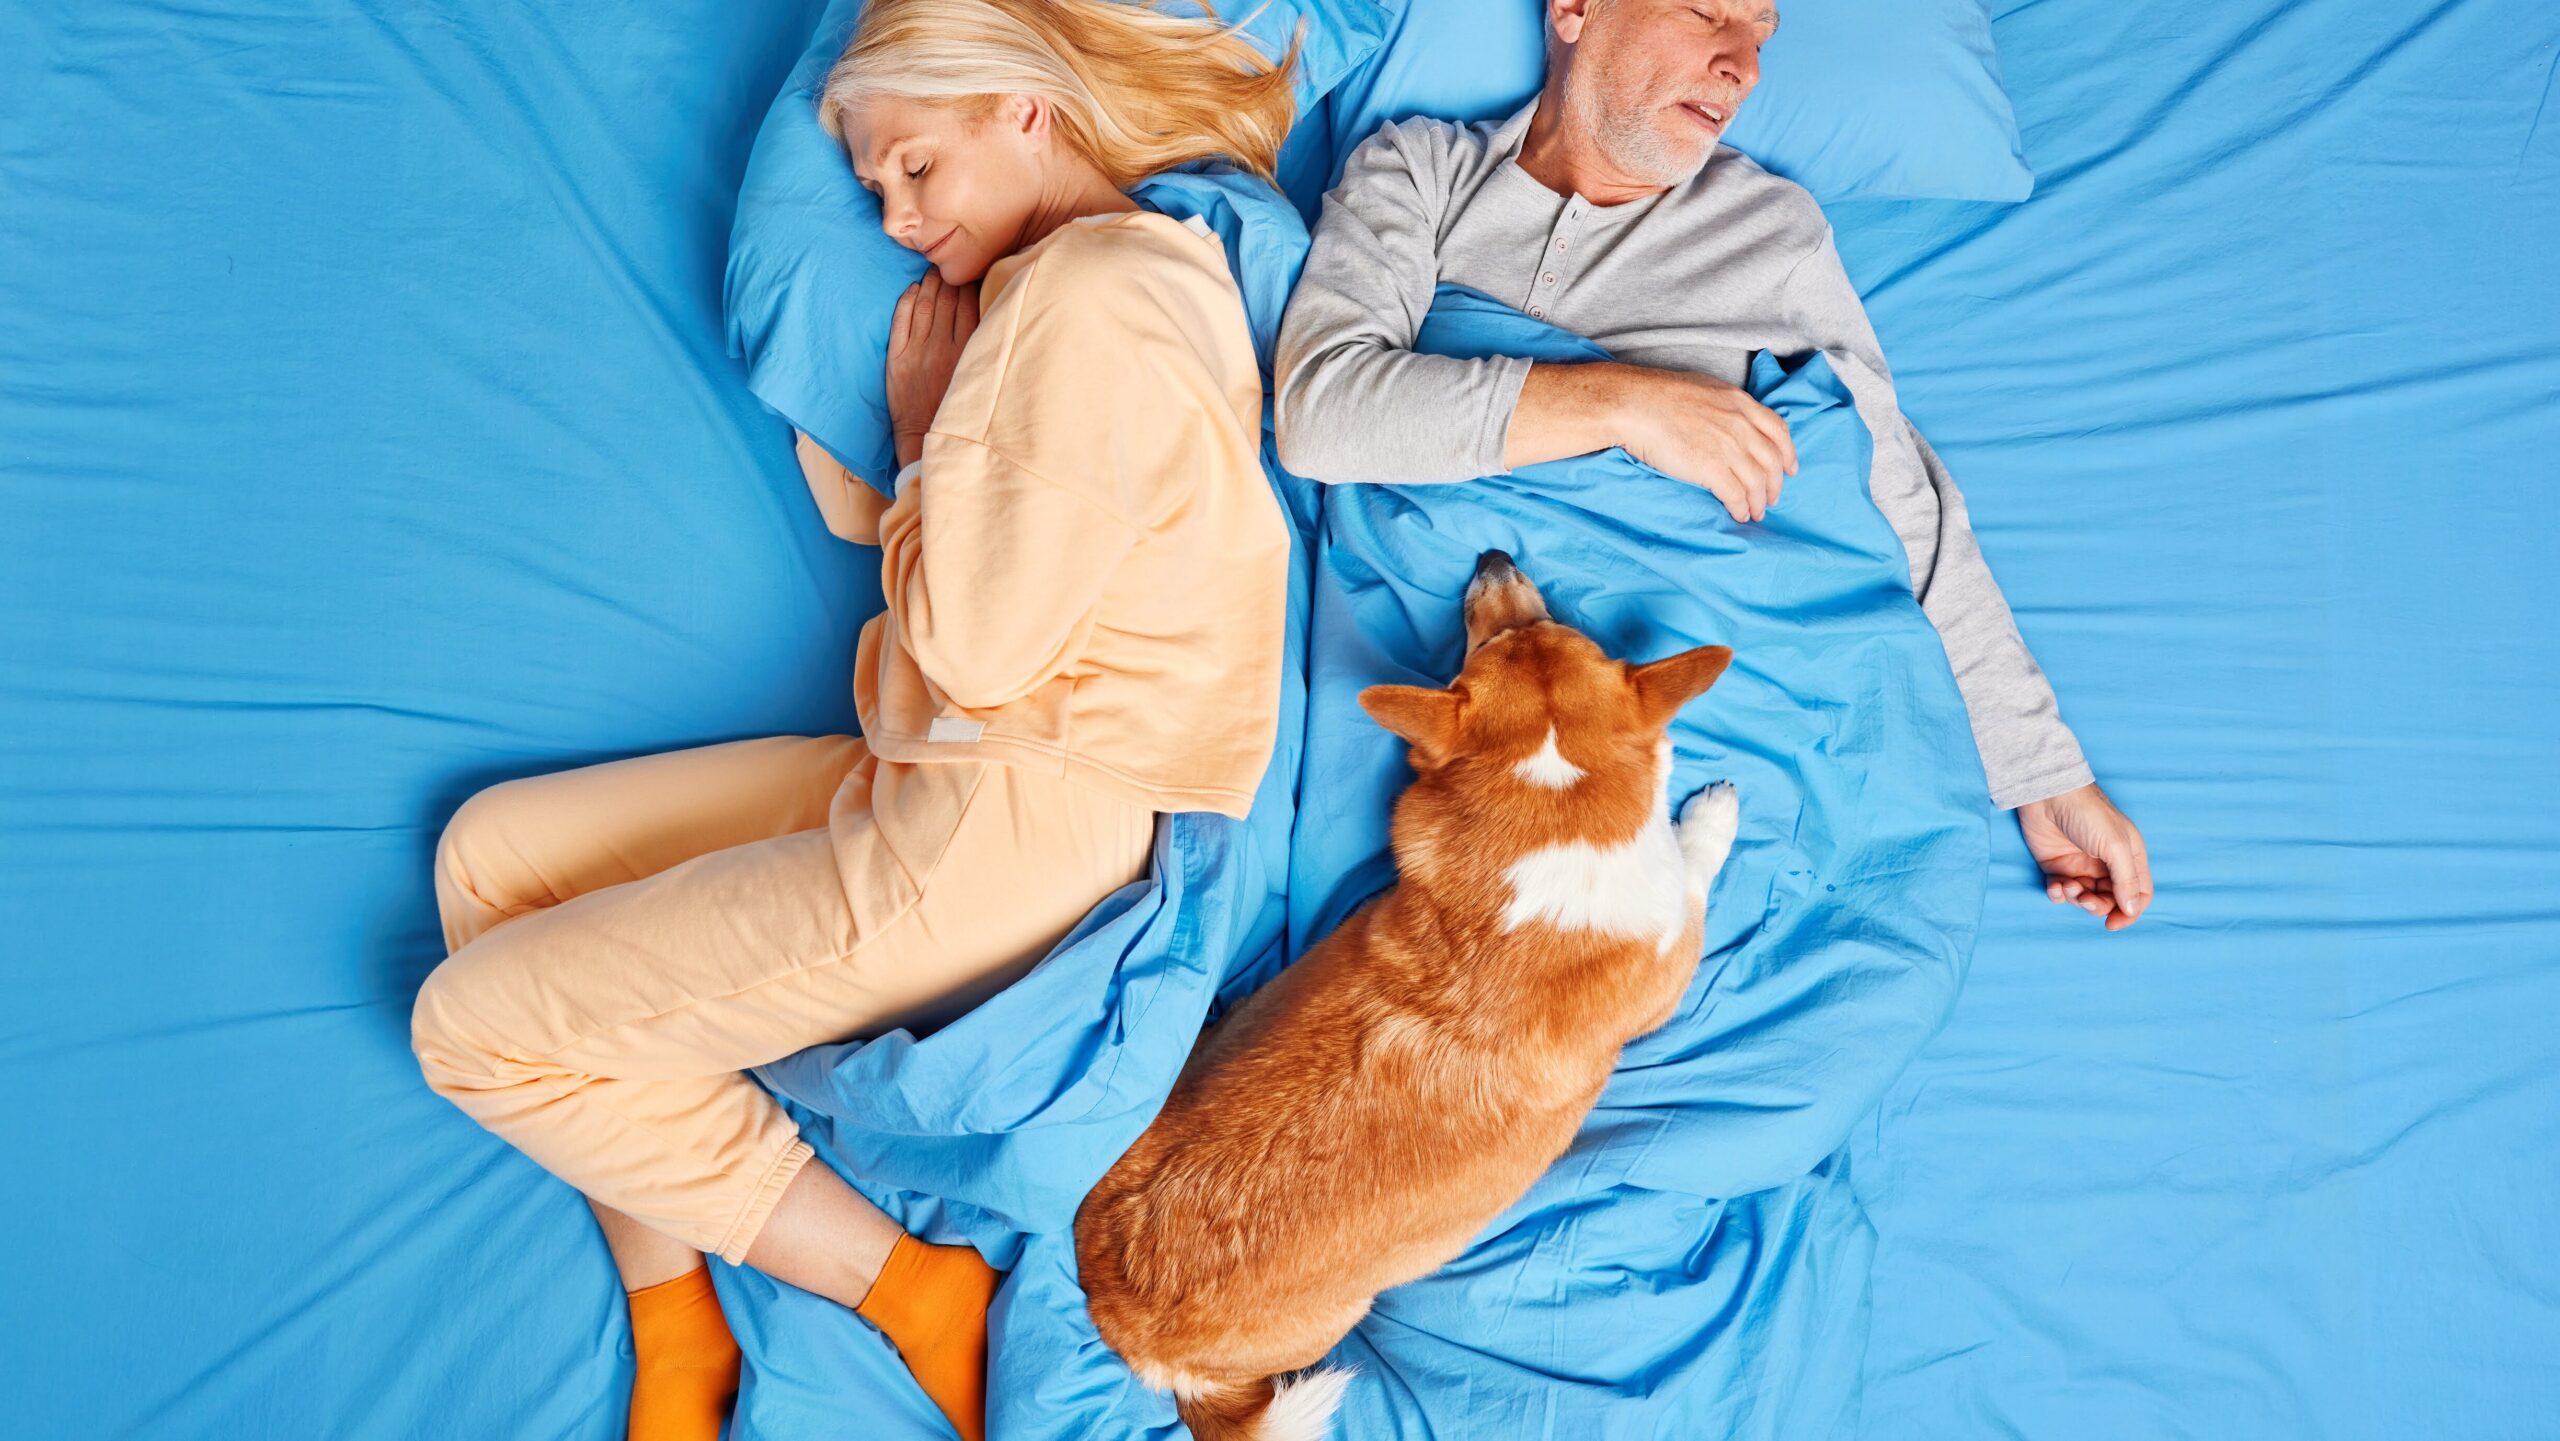 Bed time routine. View from above of senior couple sleep calm together with dog spend time at cozy bedroom on comfortable bed enjoy lazy Sunday. Relax lifestyle. Getting rest your body needs